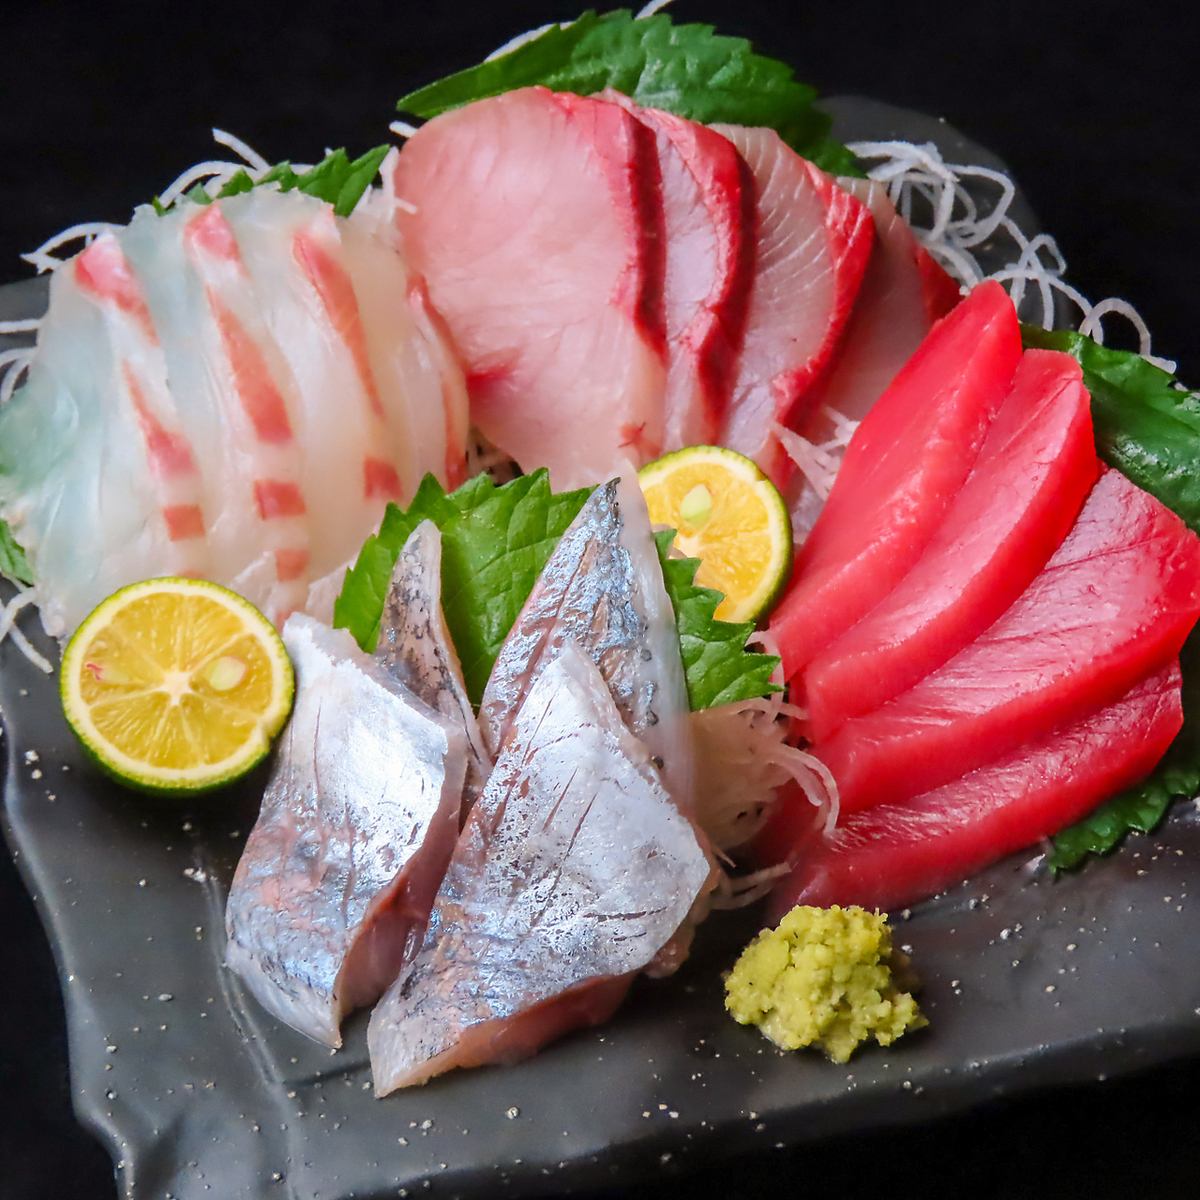 Enjoy crunchy fresh fish! This is a great restaurant that also has meat dishes!